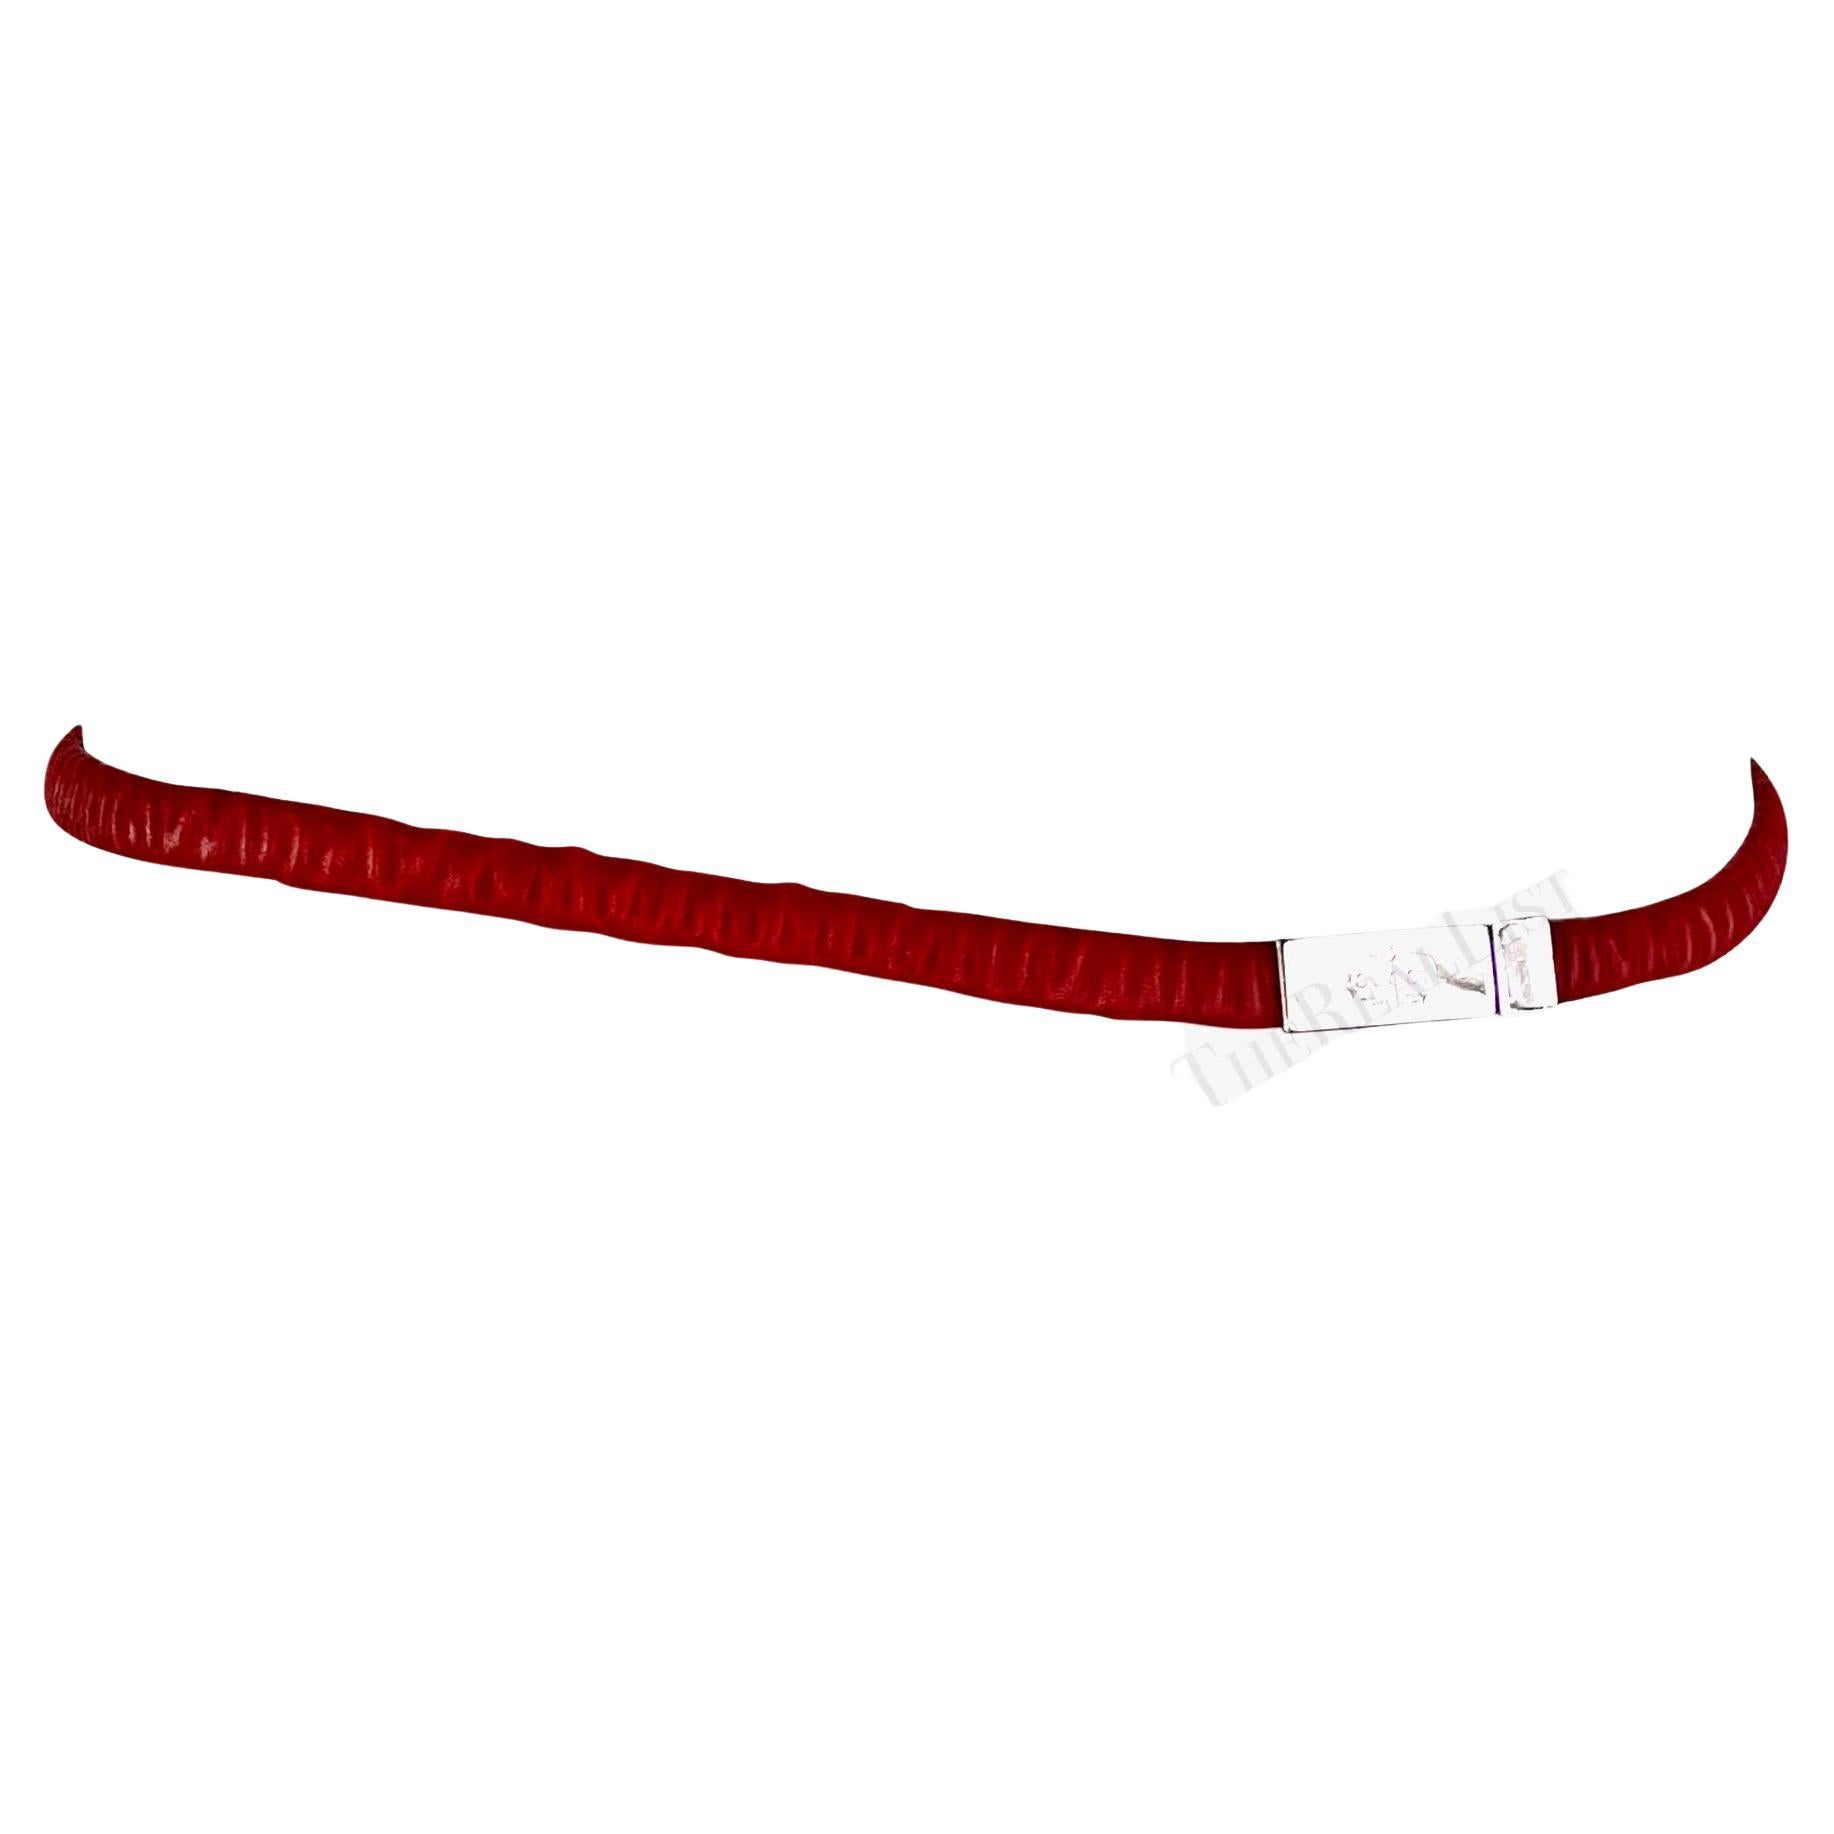 S/S 1999 Gucci by Tom Ford Runway Elasticized Red Leather Logo Thin Belt For Sale 7